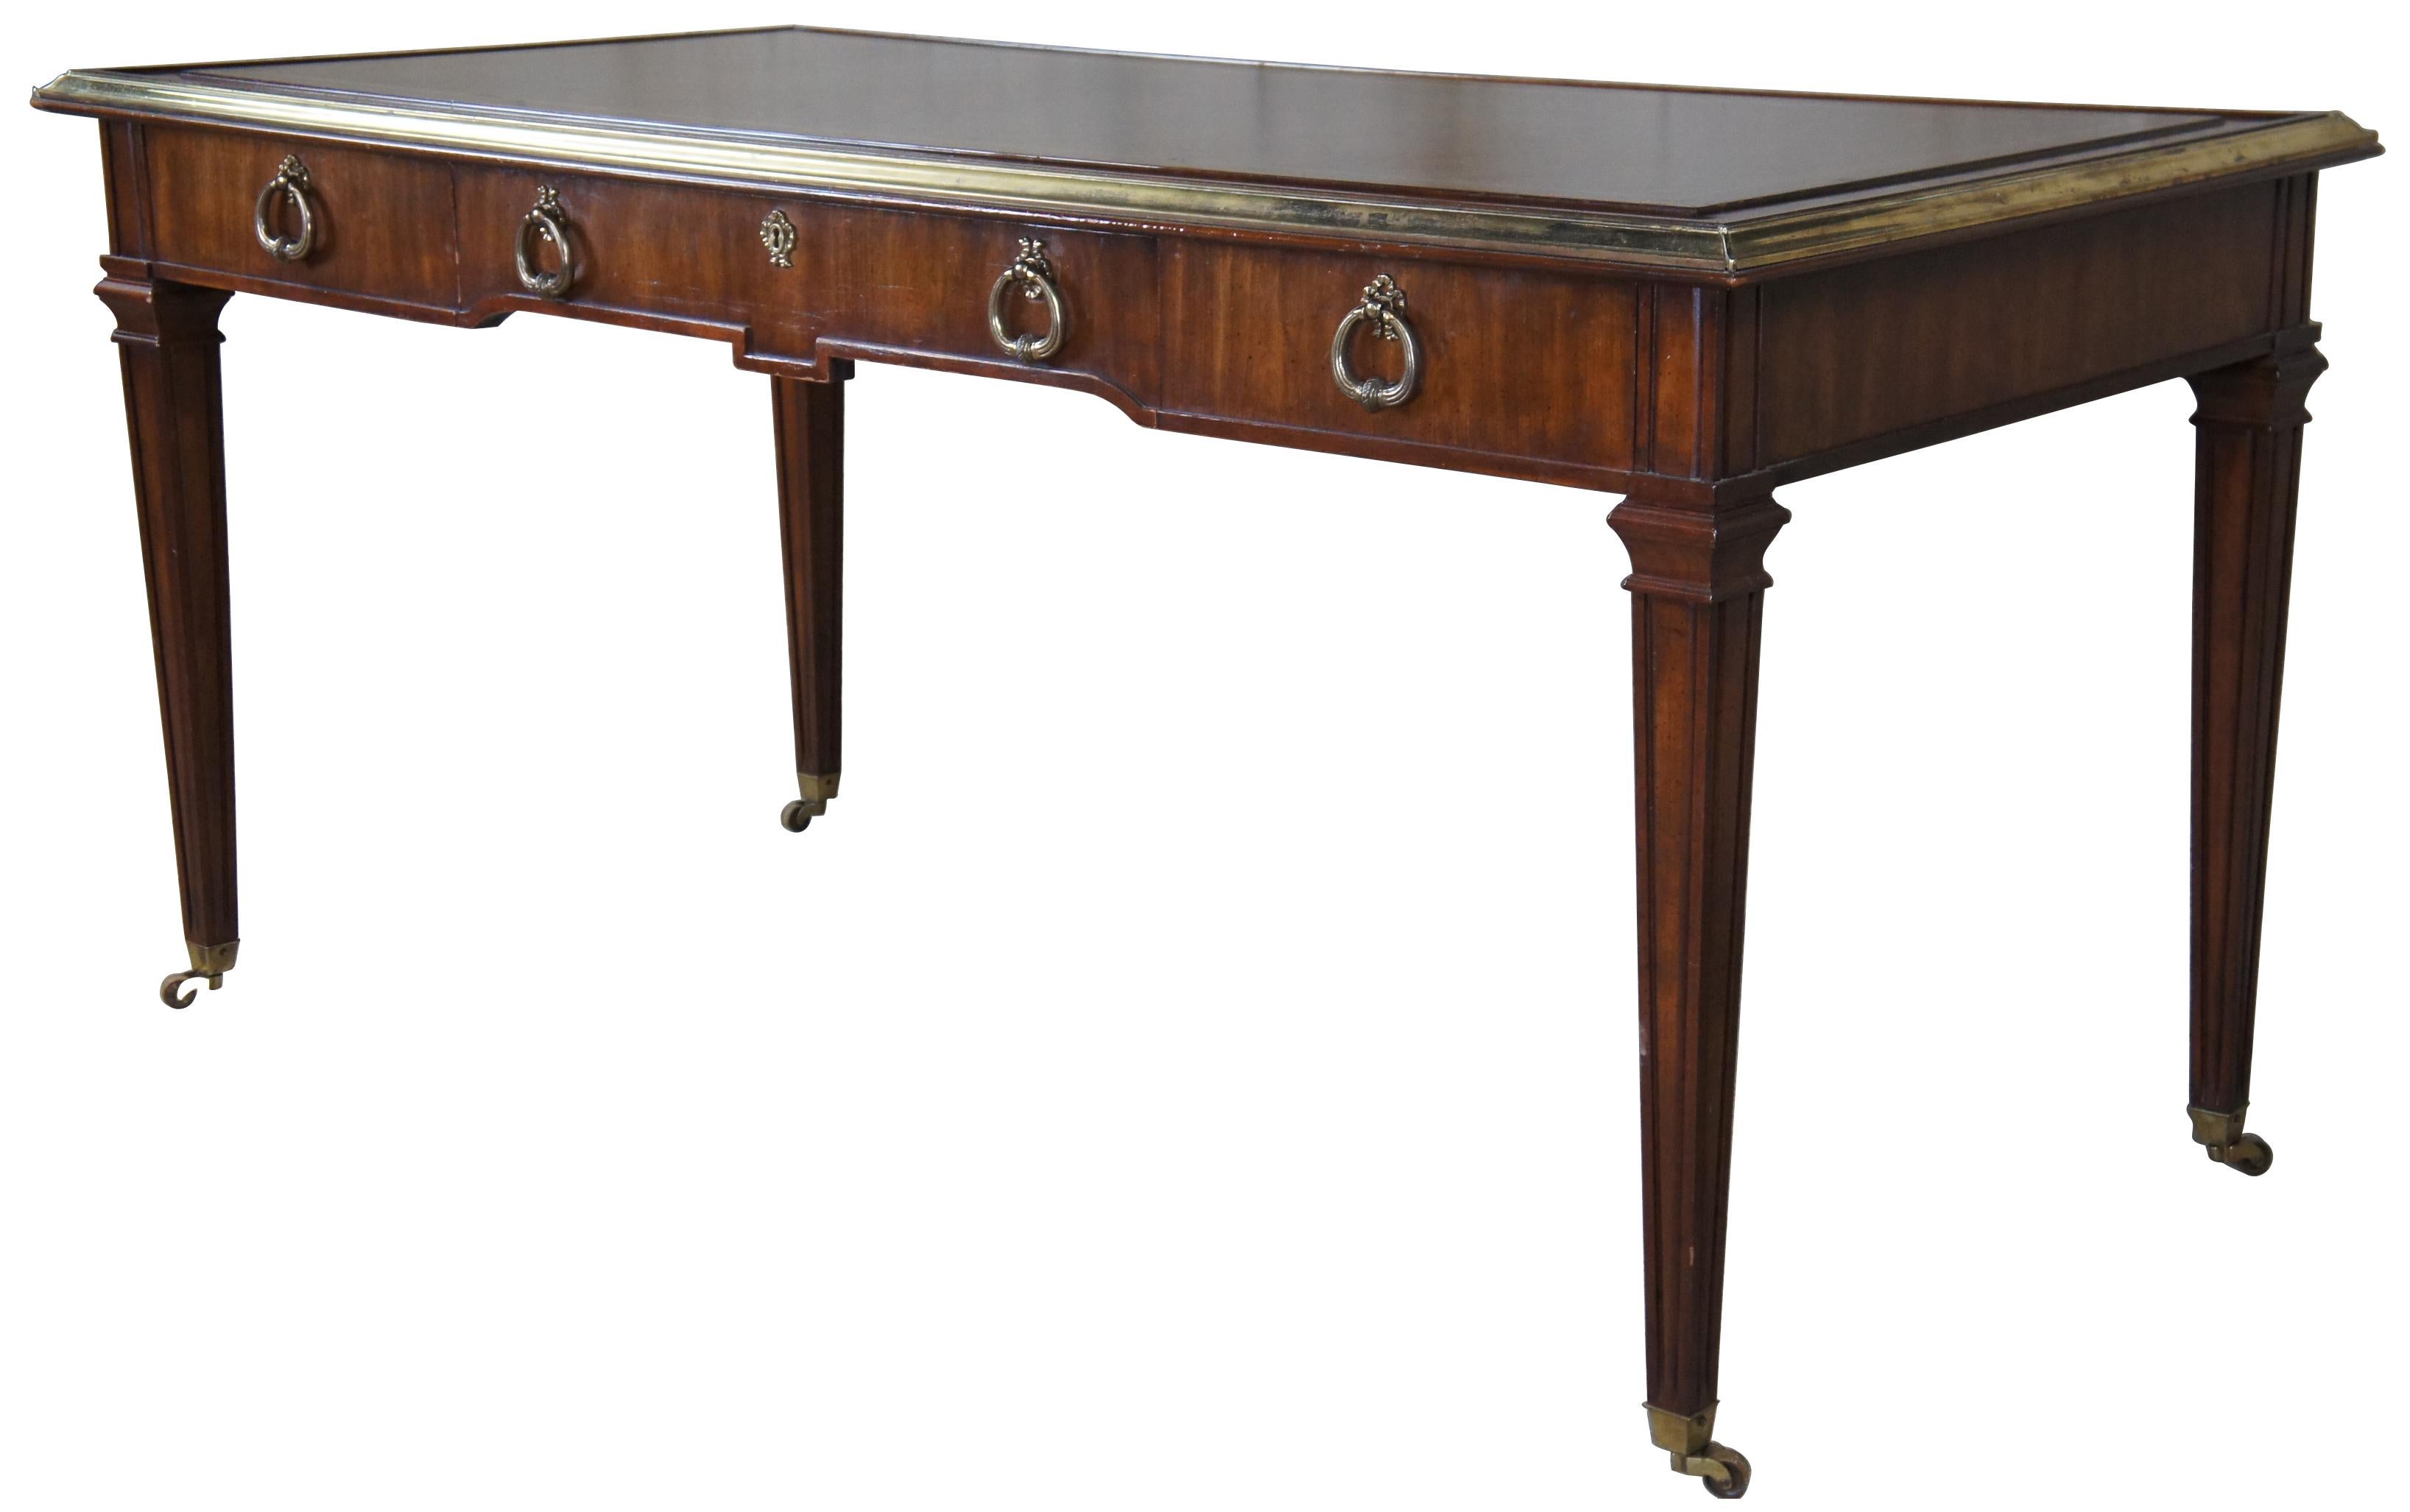 Vintage Sligh Furniture writing desk. Made of mahogany with brass edgework, tooled leather top featuring Greek key, fleur de lis, repeating spades and neoclassical drawer pulls.
 